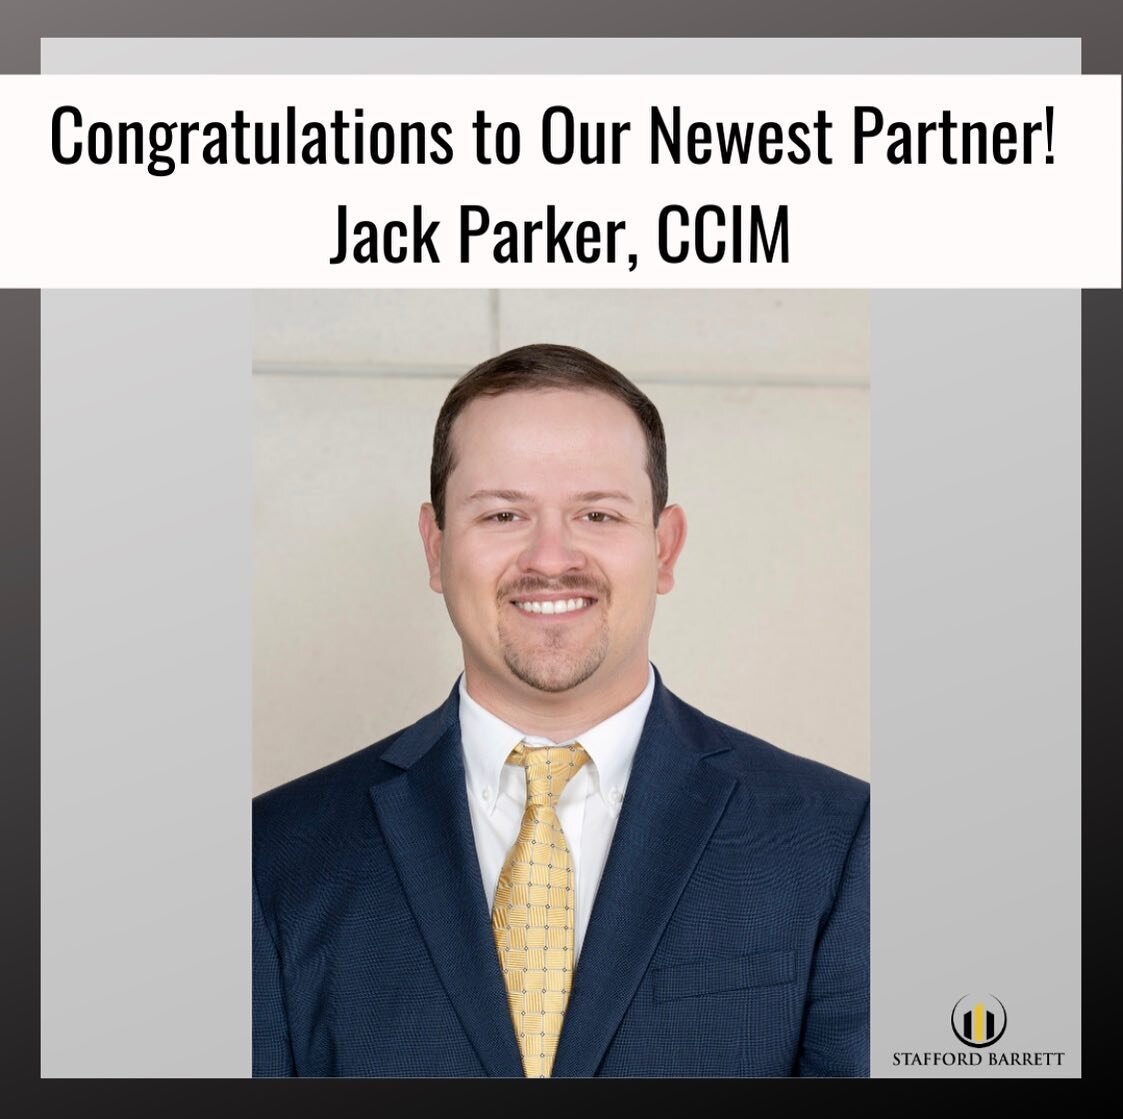 Stafford Barrett is proud to announce that Jack Parker, CCIM has been invited to become a Partner in the firm. 

Since the early days of Stafford Barrett, Mr. Parker has proven to be an extremely valuable asset to his clients and embodies all of our 